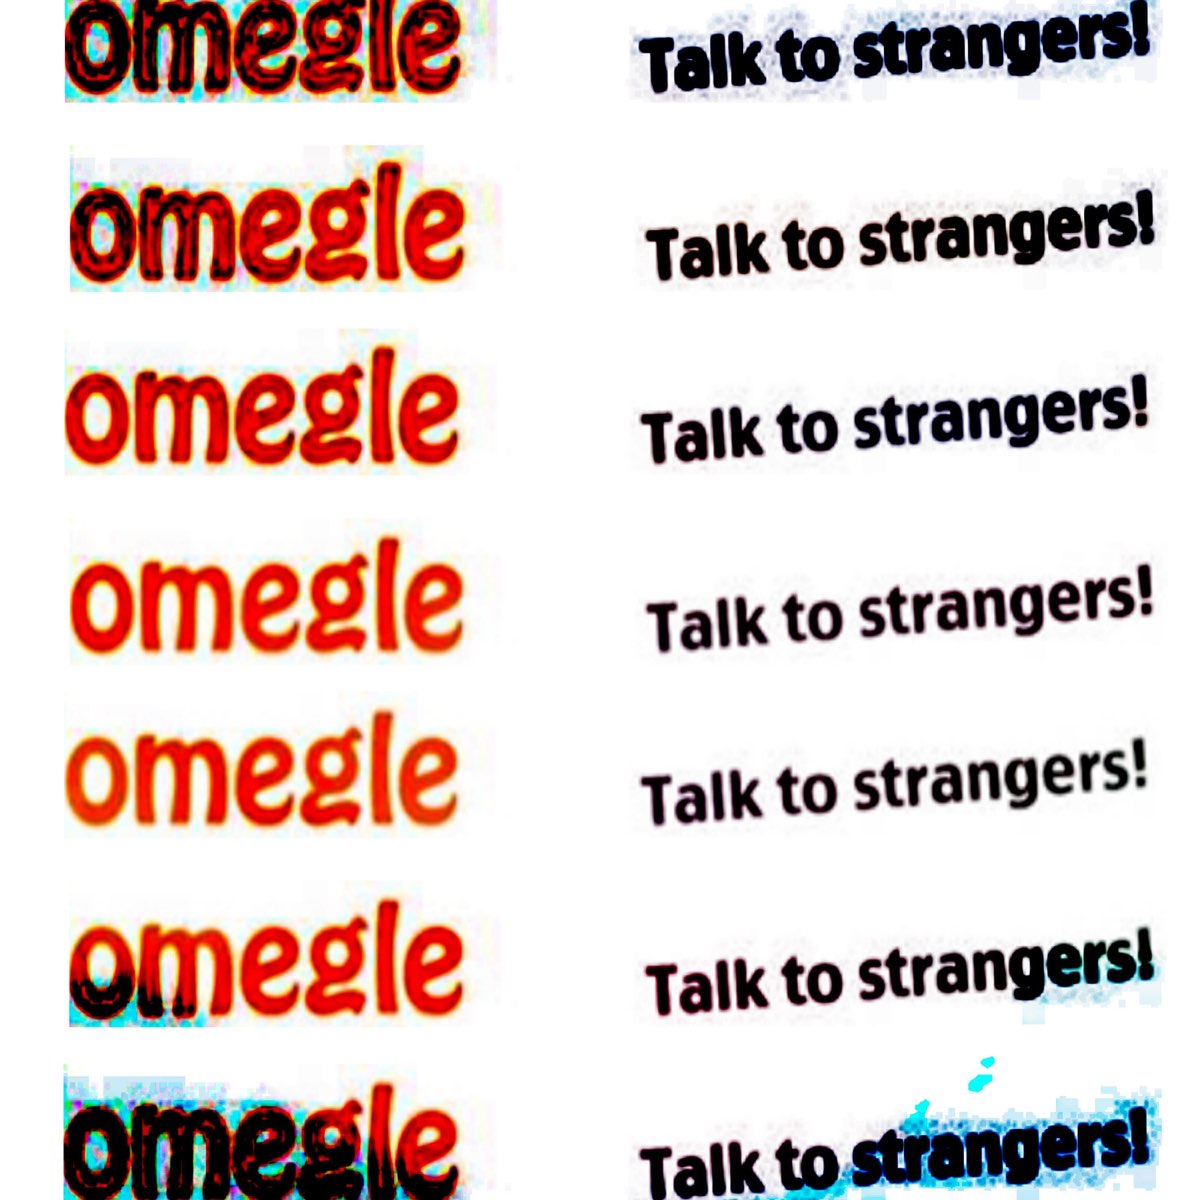 Omege